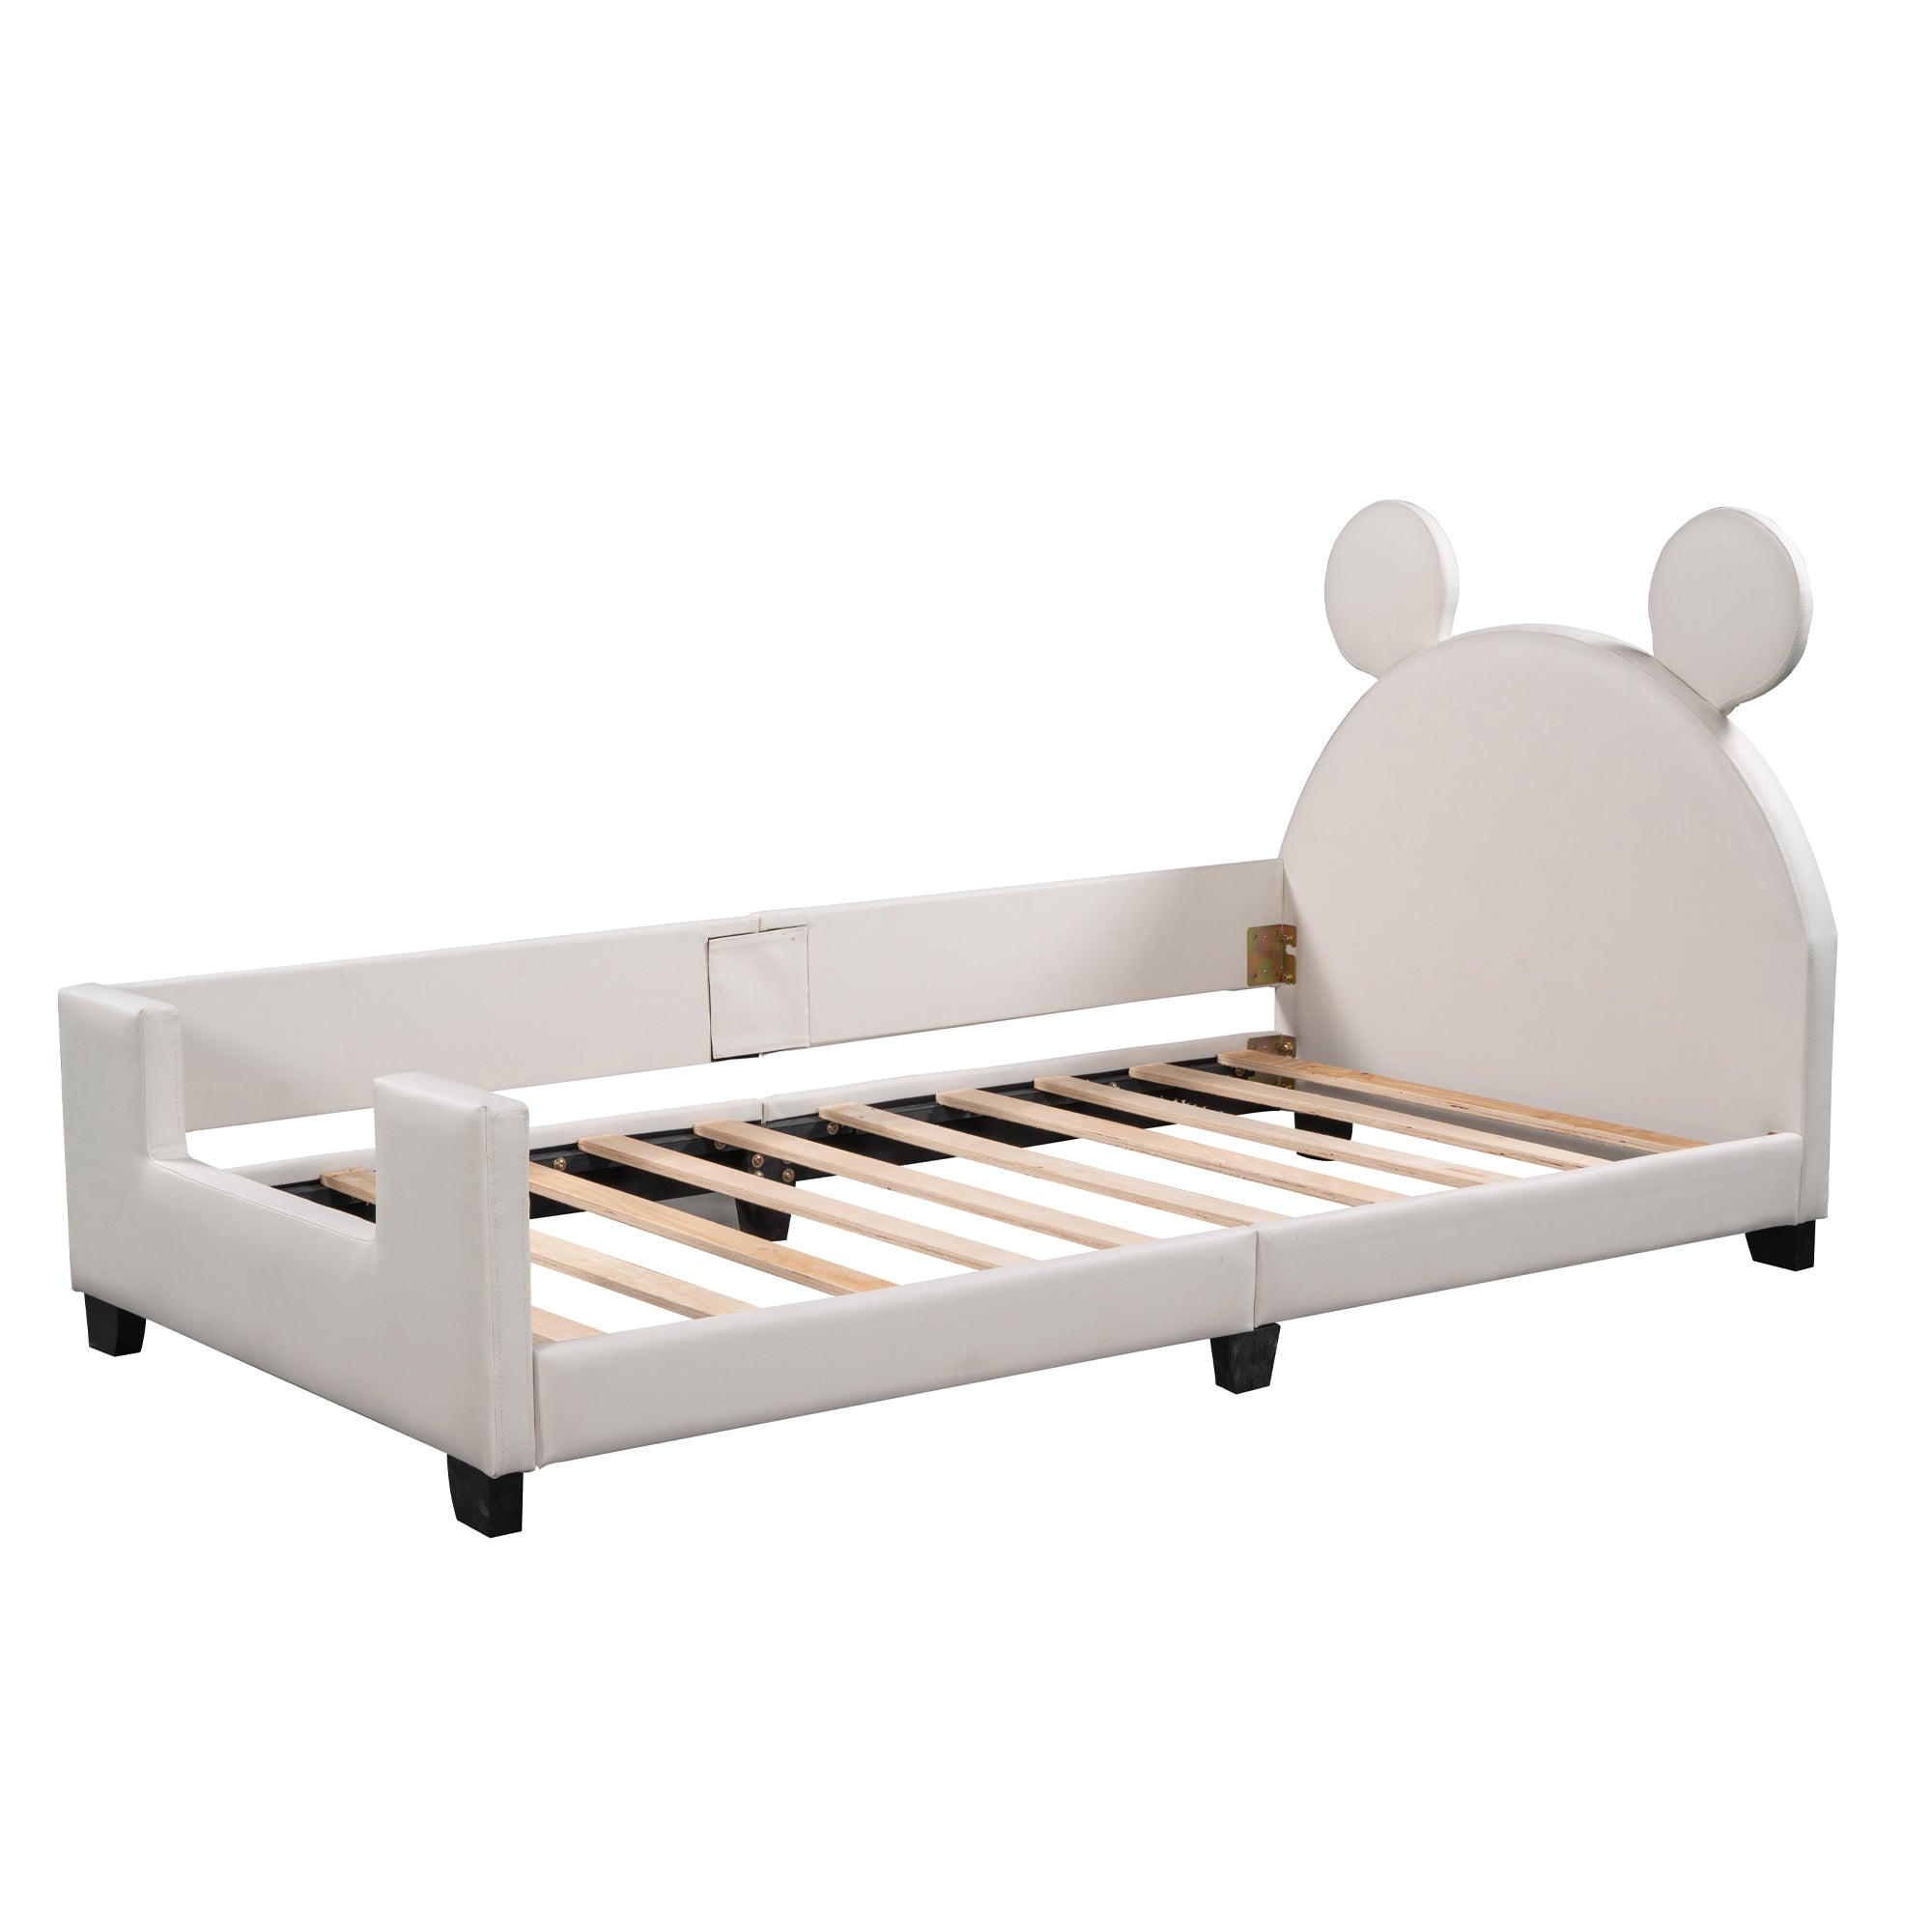 Twin Size Upholstered Daybed with Carton Ears Shaped white-pu leather